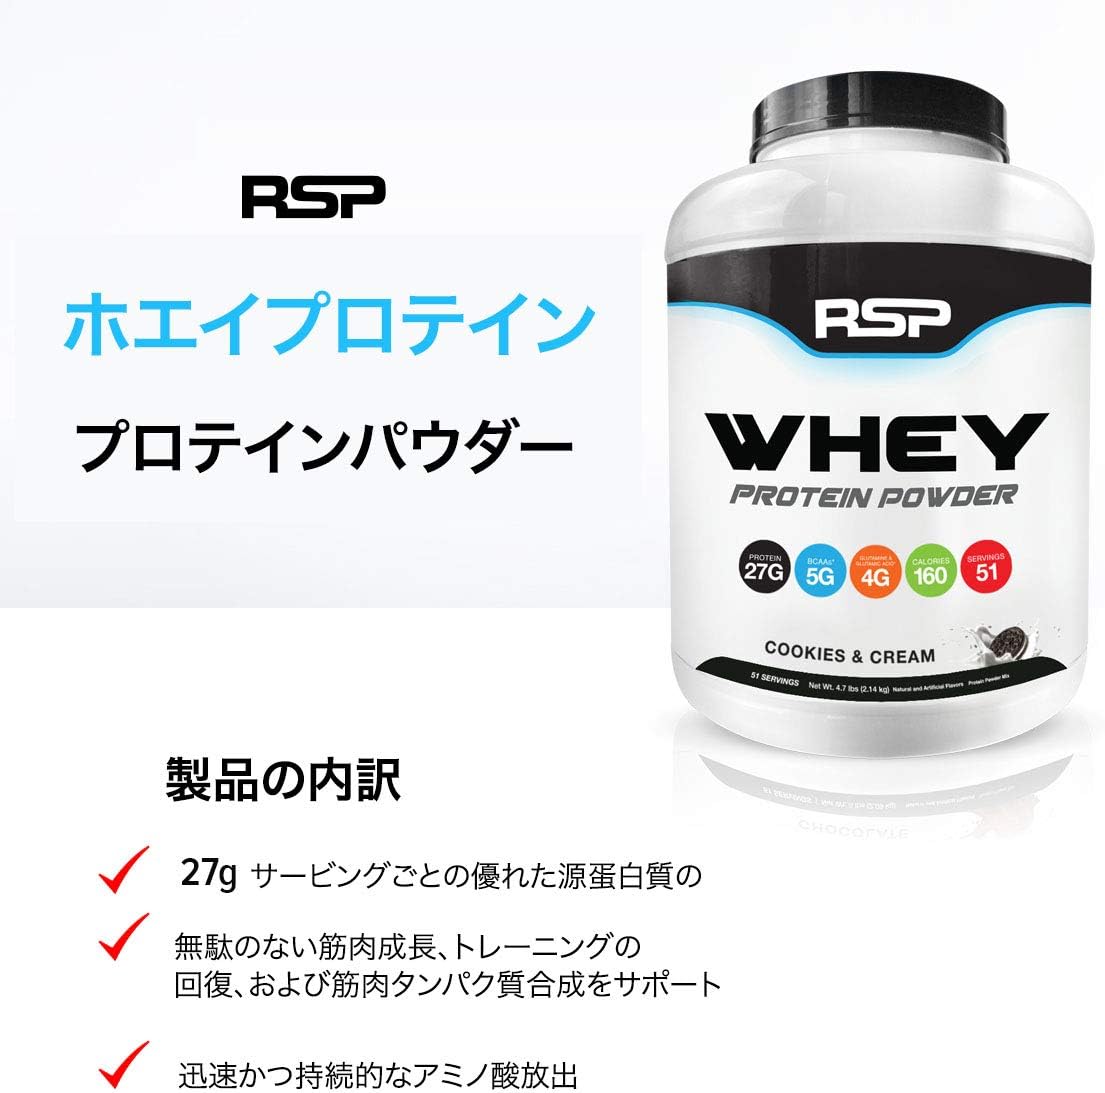 RSP Whey Protein Powder (5LB) - 27G Premium Whey Protein Shake with BCAAs and Glutamine, Post Workout Recovery Protein Supplement, 51 Servings (Chocolate) : Health & Household